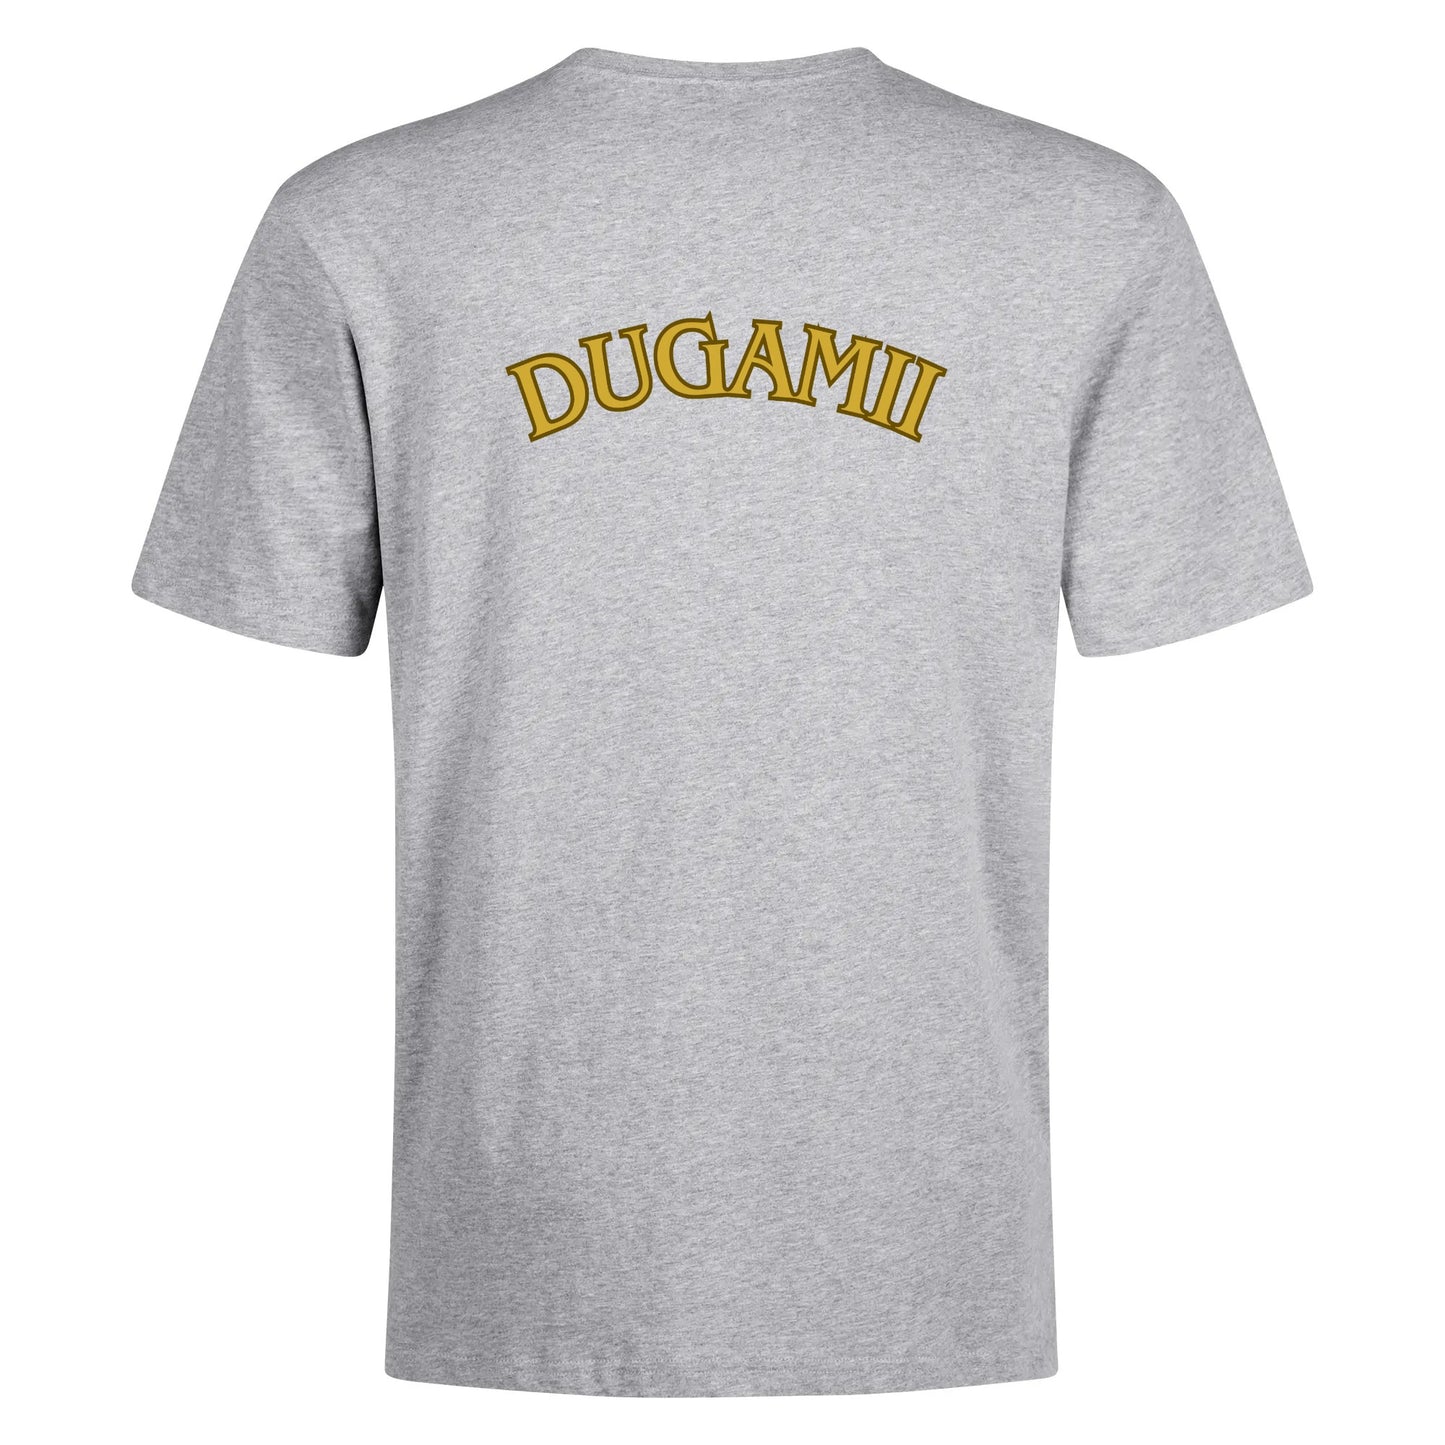 Mens DuGamii Barbed Heart Cotton T-Shirt